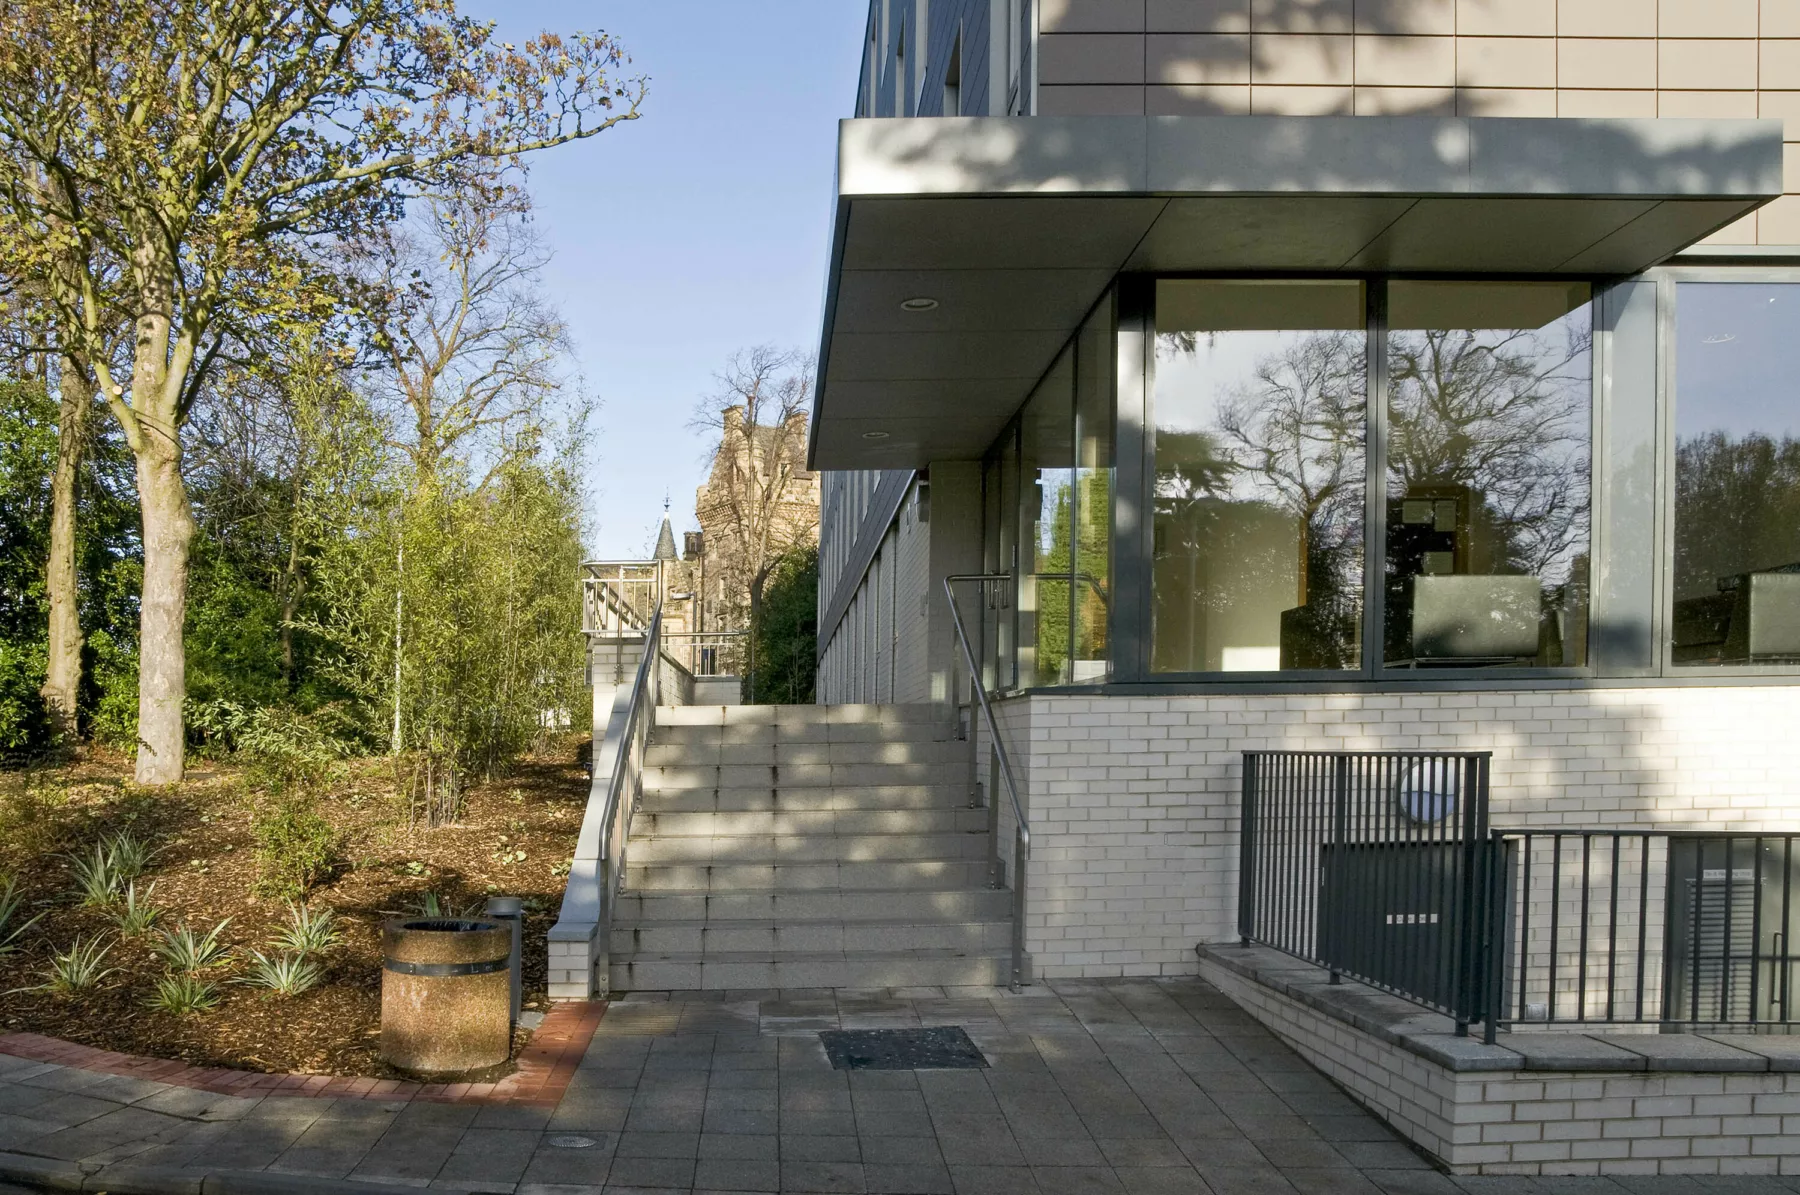 View of the entrance to John Burnett House, student residential block at University of Edinburgh's Pollock Halls of Residence. Floor to ceiling glazed entrance hall within the pale brick clad ground floor. Above, the floors are in bronze-coloured cladding. Landscaped grounds to the left.